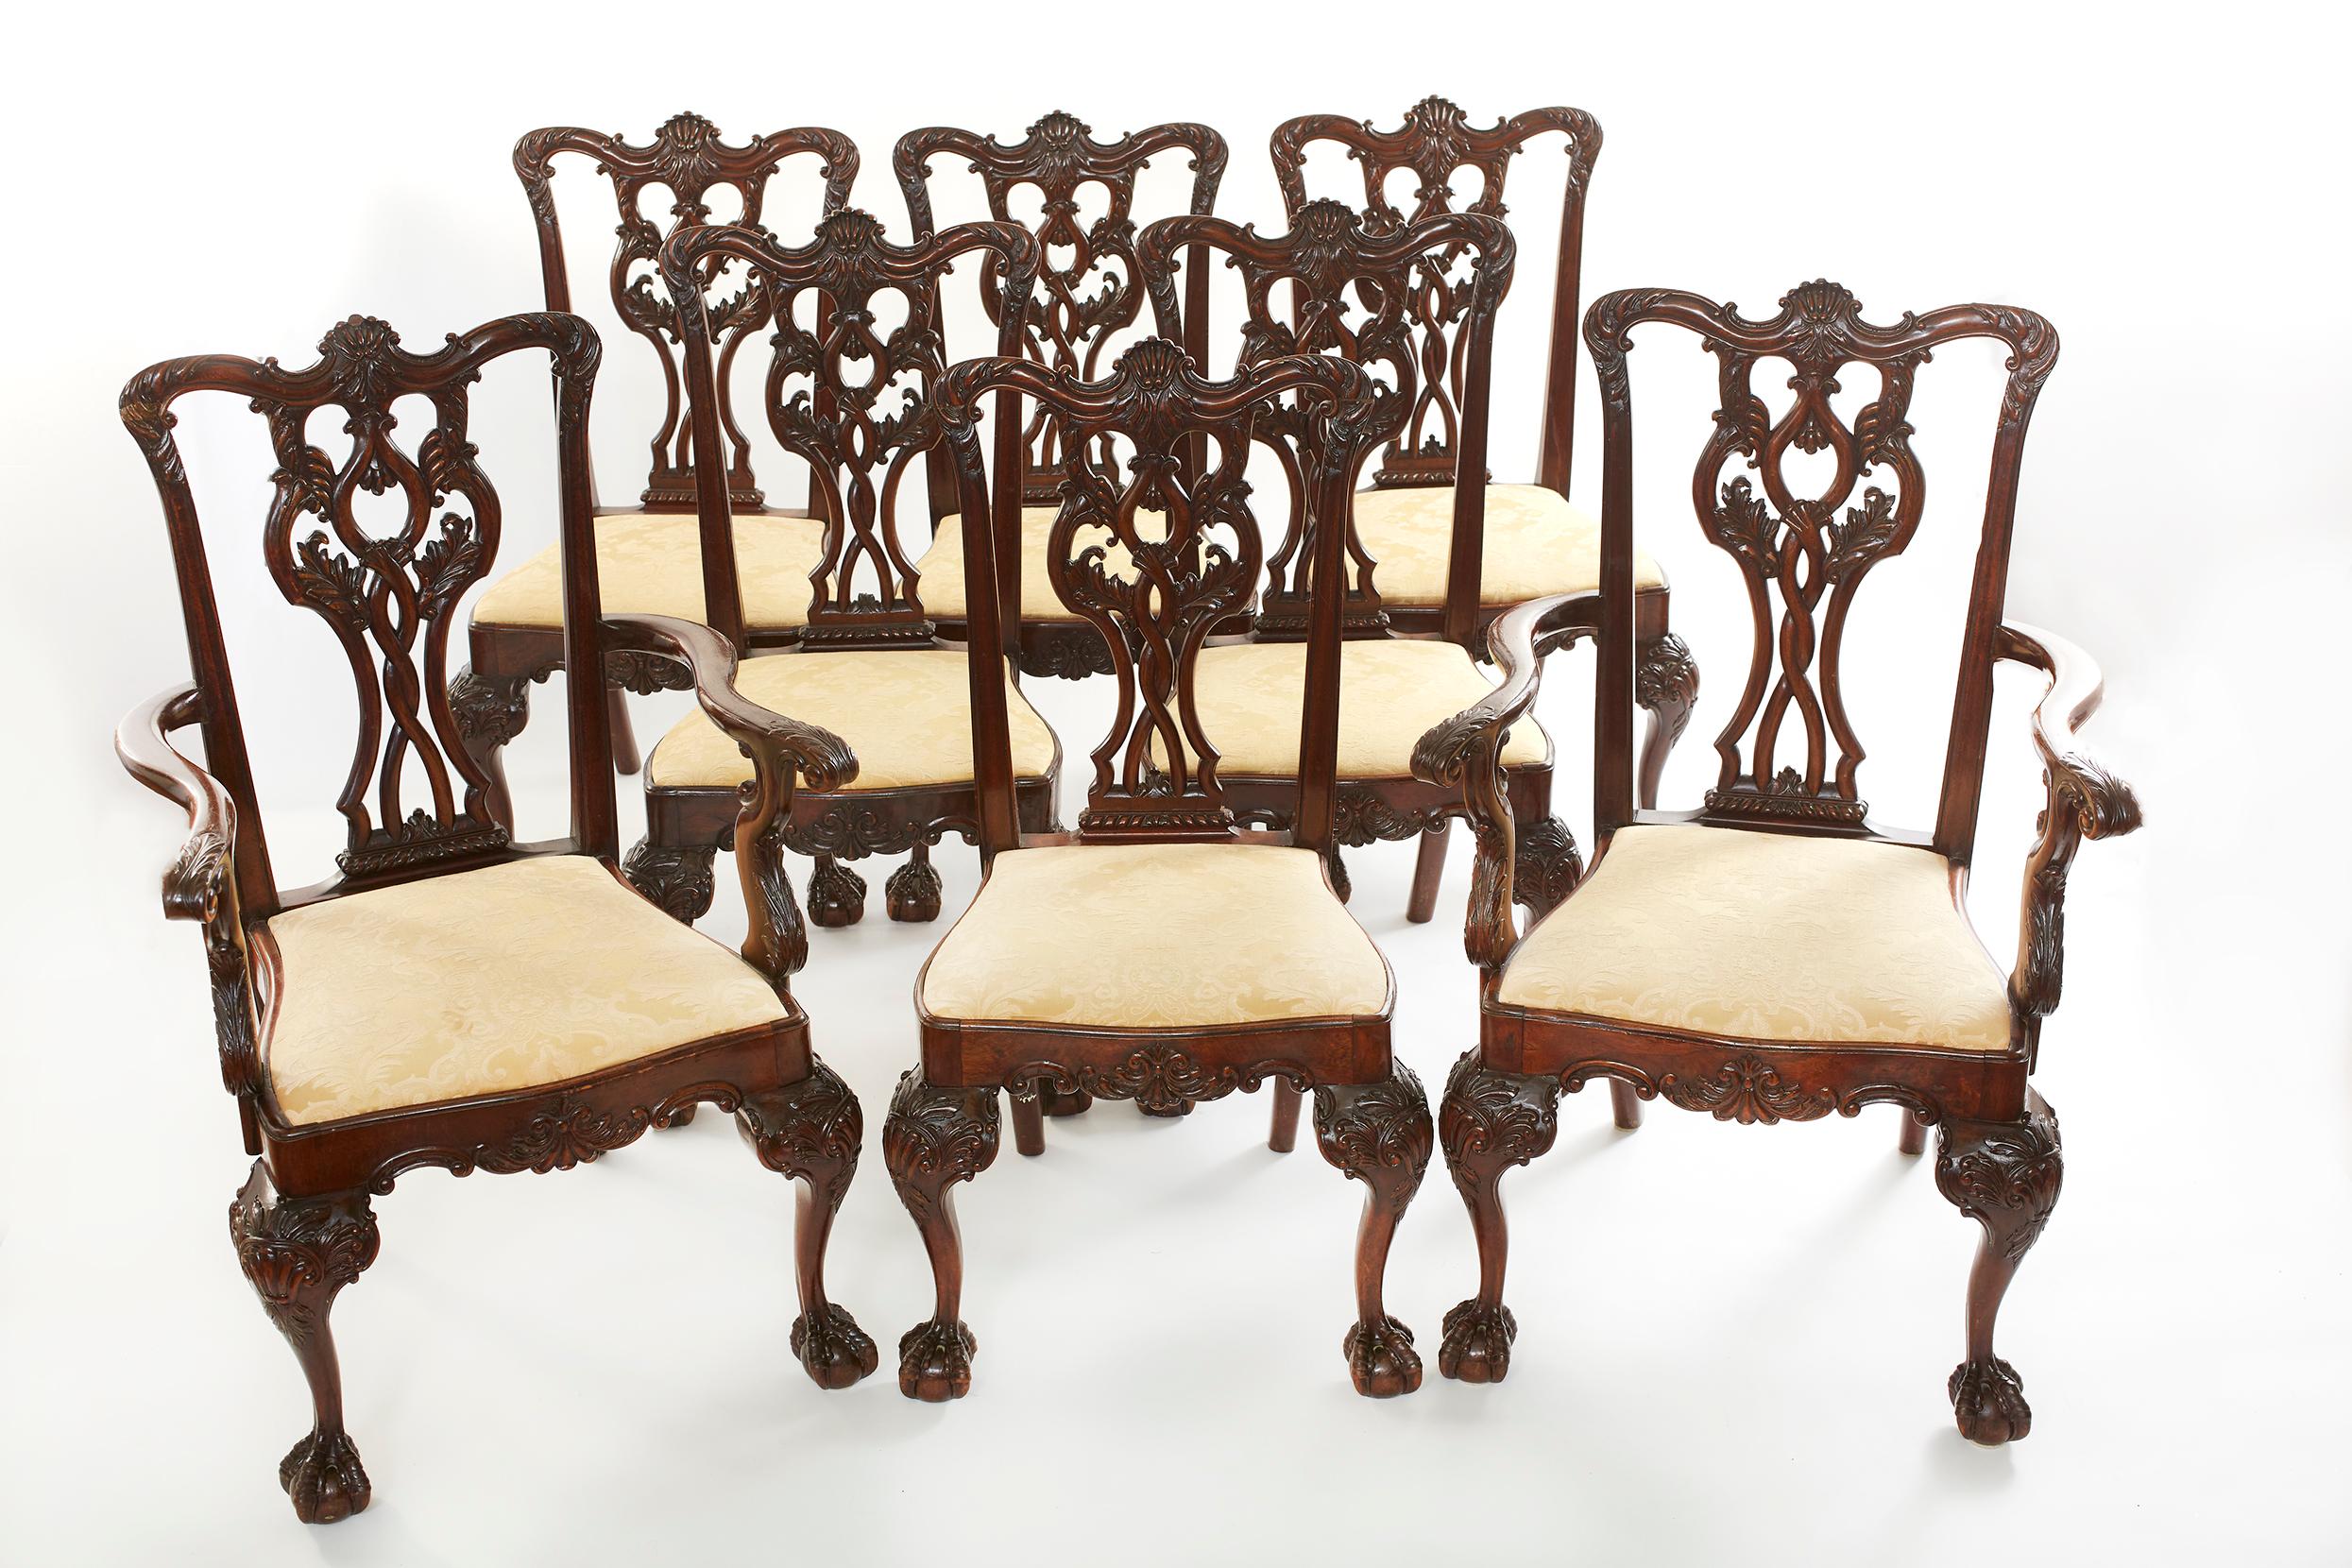 Beautifully hand carved mahogany wood set of 8 dining chairs. The set consist of six side chairs and two armchairs. constructed in mahogany, which has been excellently and comprehensively carved; rising from cabriole front legs, with ball and claw